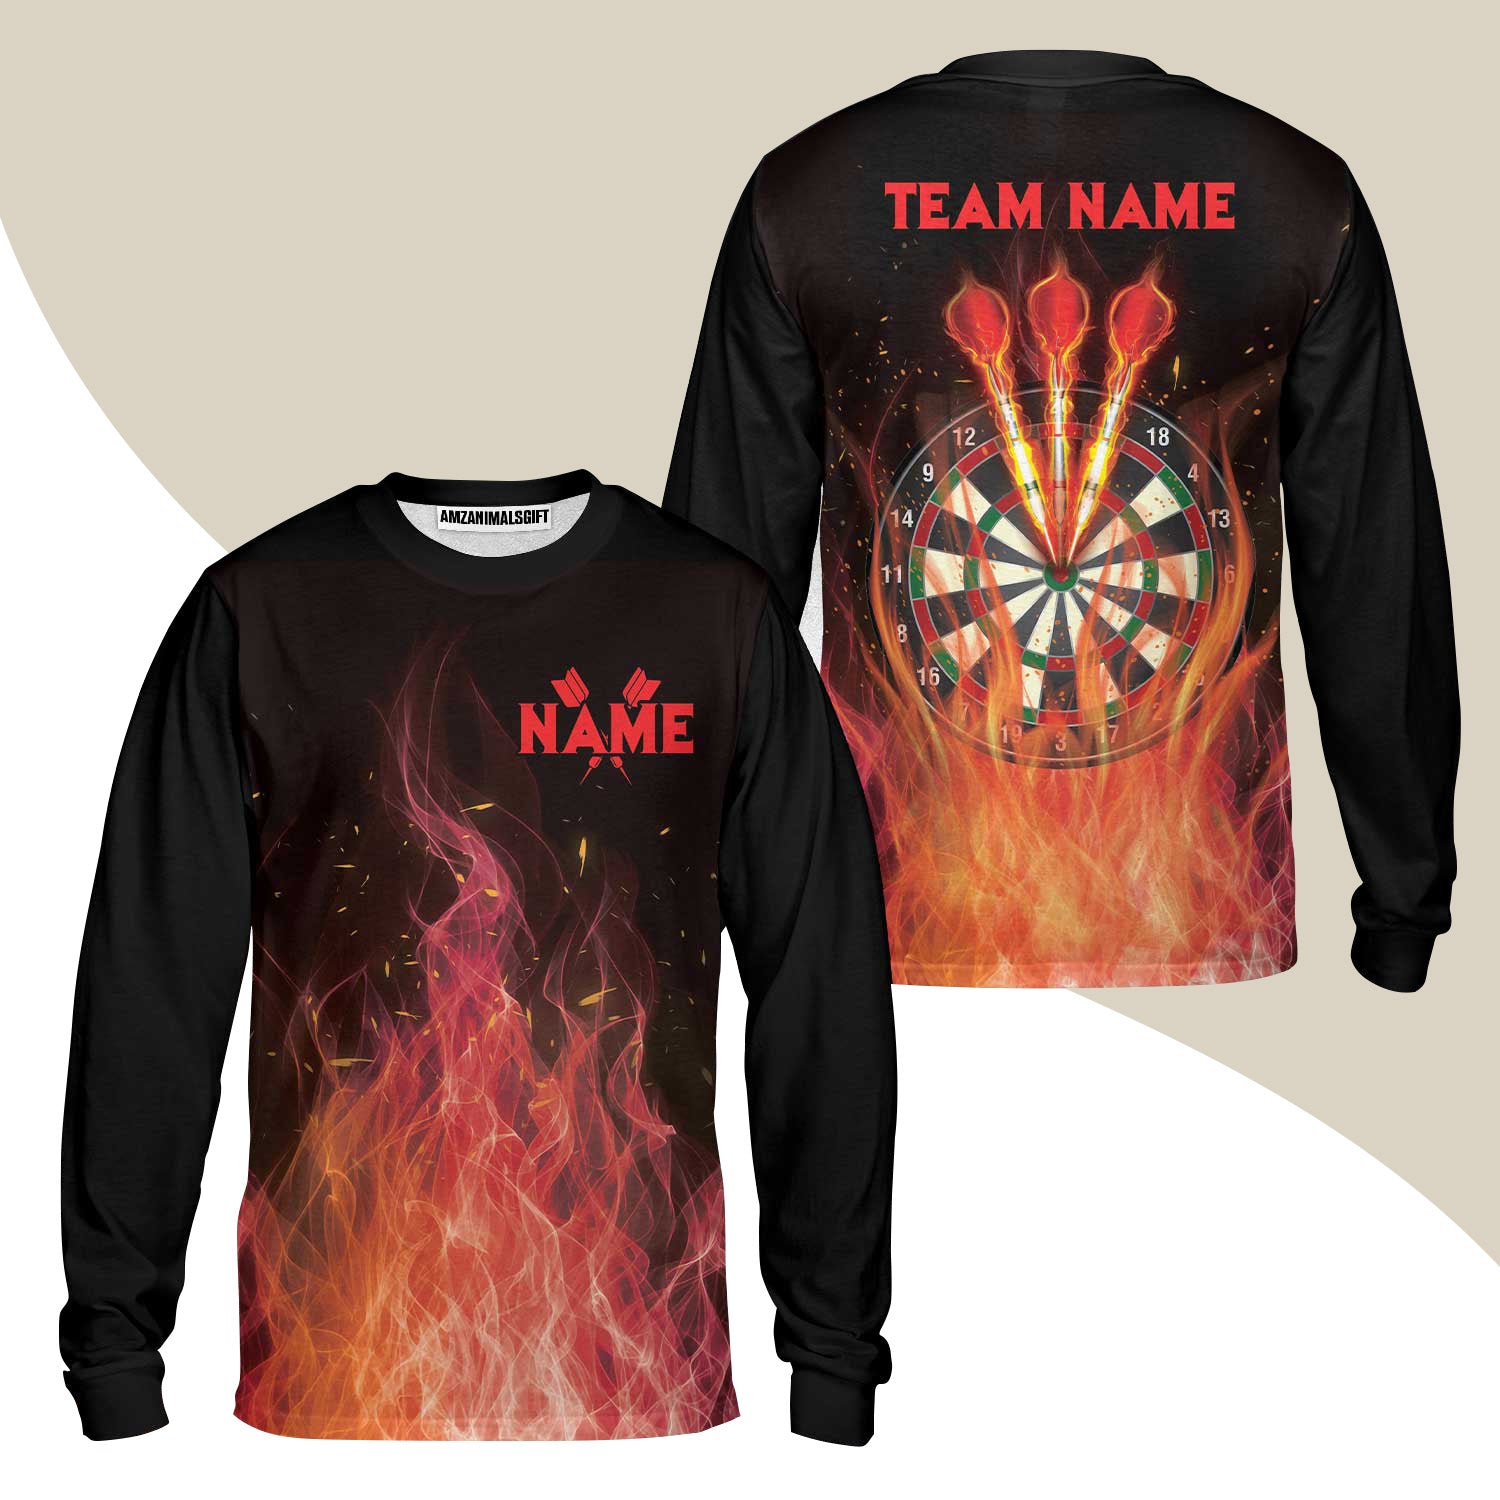 Darts Long Sleeve Shirt Custom Name And Team Name, Darts Flame Player Uniform, Personalized Shirt For Darts Lovers, Darts Players